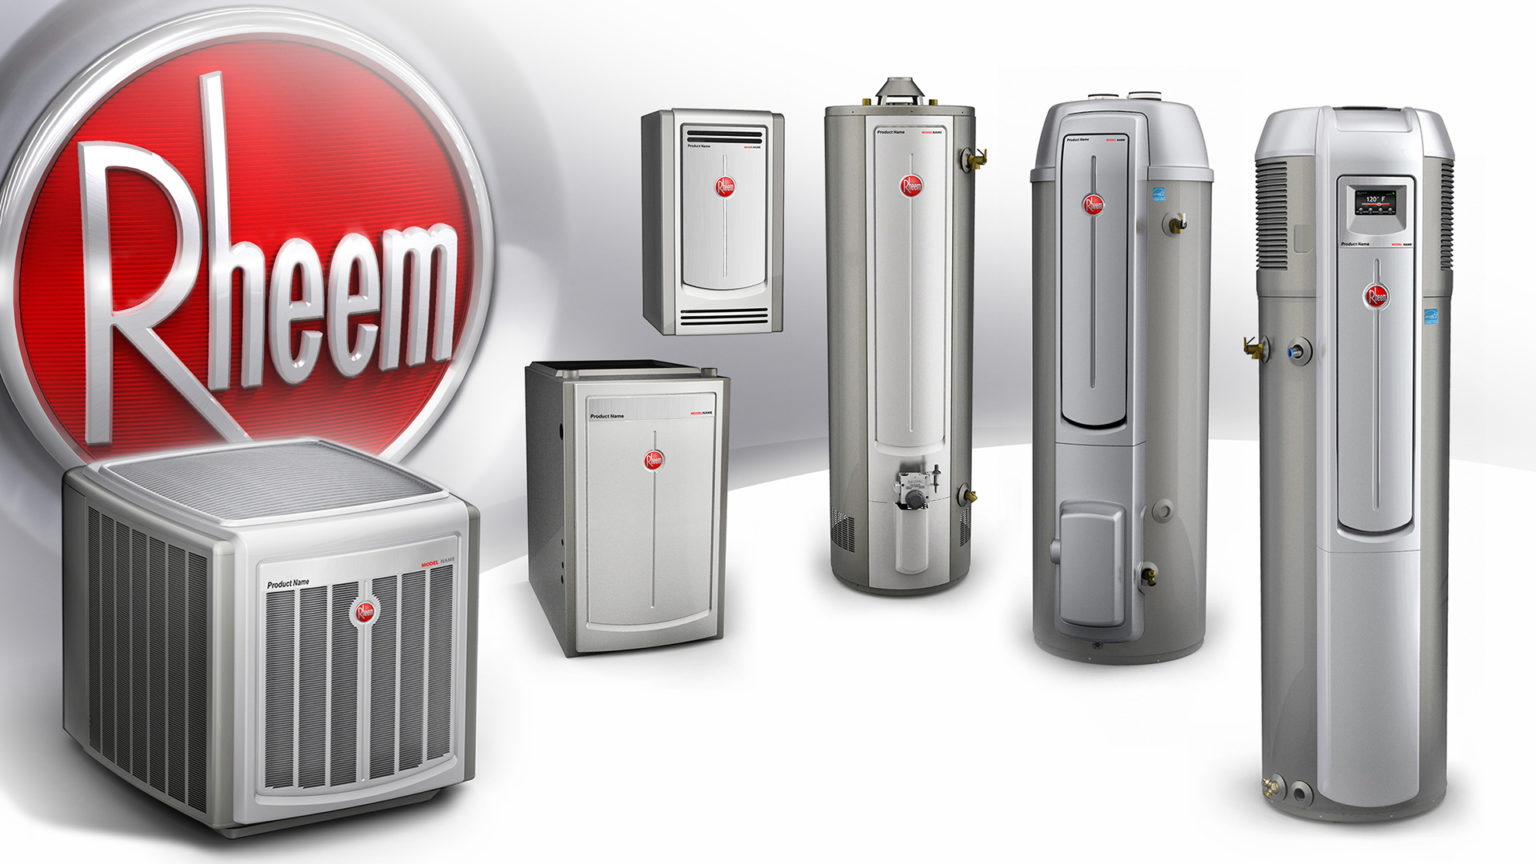 3 Rheem 40 Gallon Gas Water Heater Review on the Market Heaters for